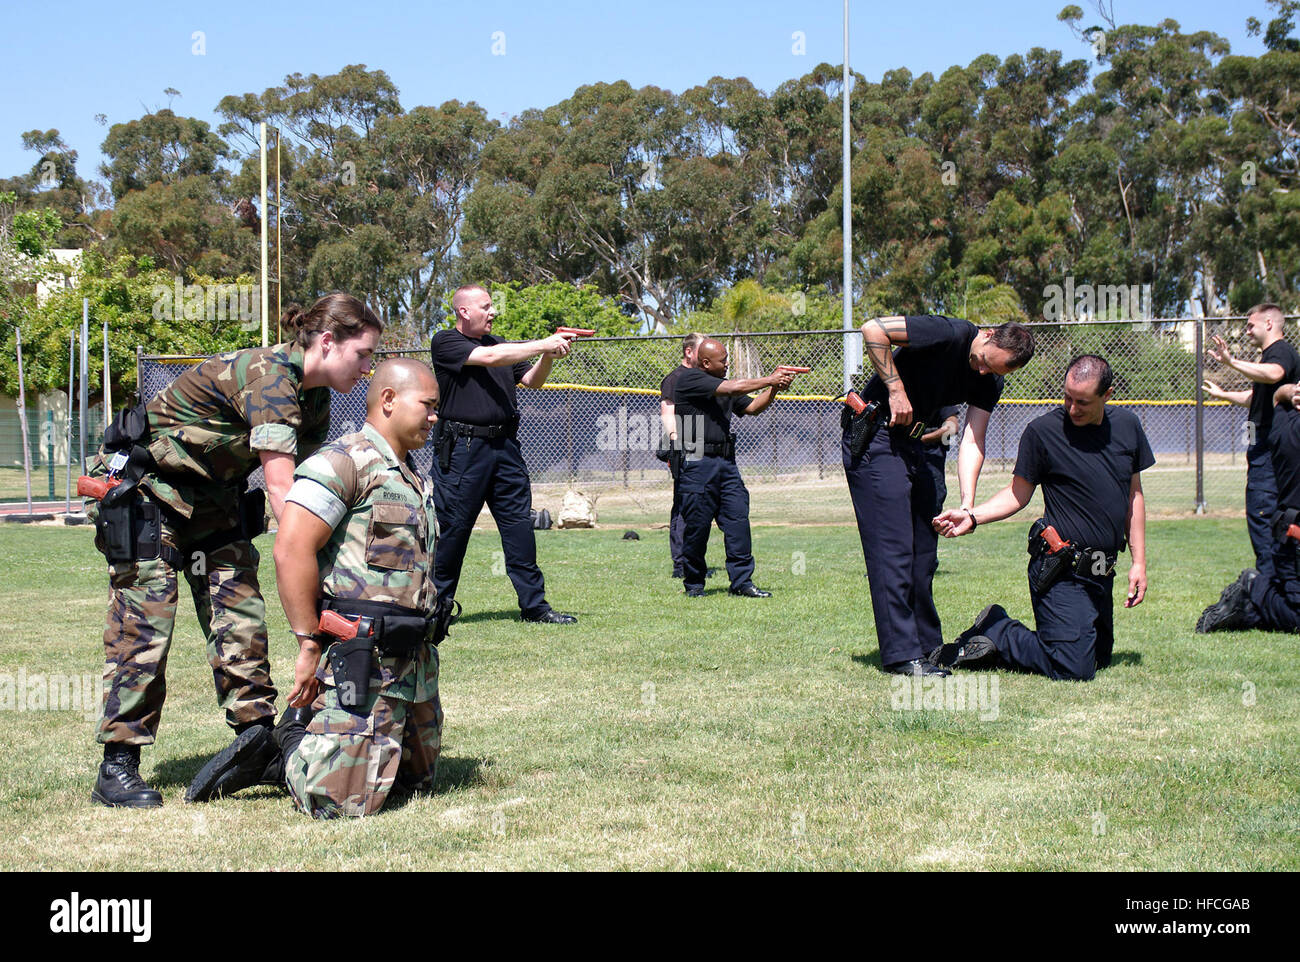 Navy law enforcement members participate in apprehension techniques during the Navy Security Forces Training Course at Naval Air Station North Island. The pilot program simultaneously trains civilian and military police forces during a nine-week course, which enables the different law enforcement agencies to successfully work together during operations. (Photo by: Petty Officer 3rd Class Spencer Mickler) Navy Security Forces Training Course 276884 Stock Photo